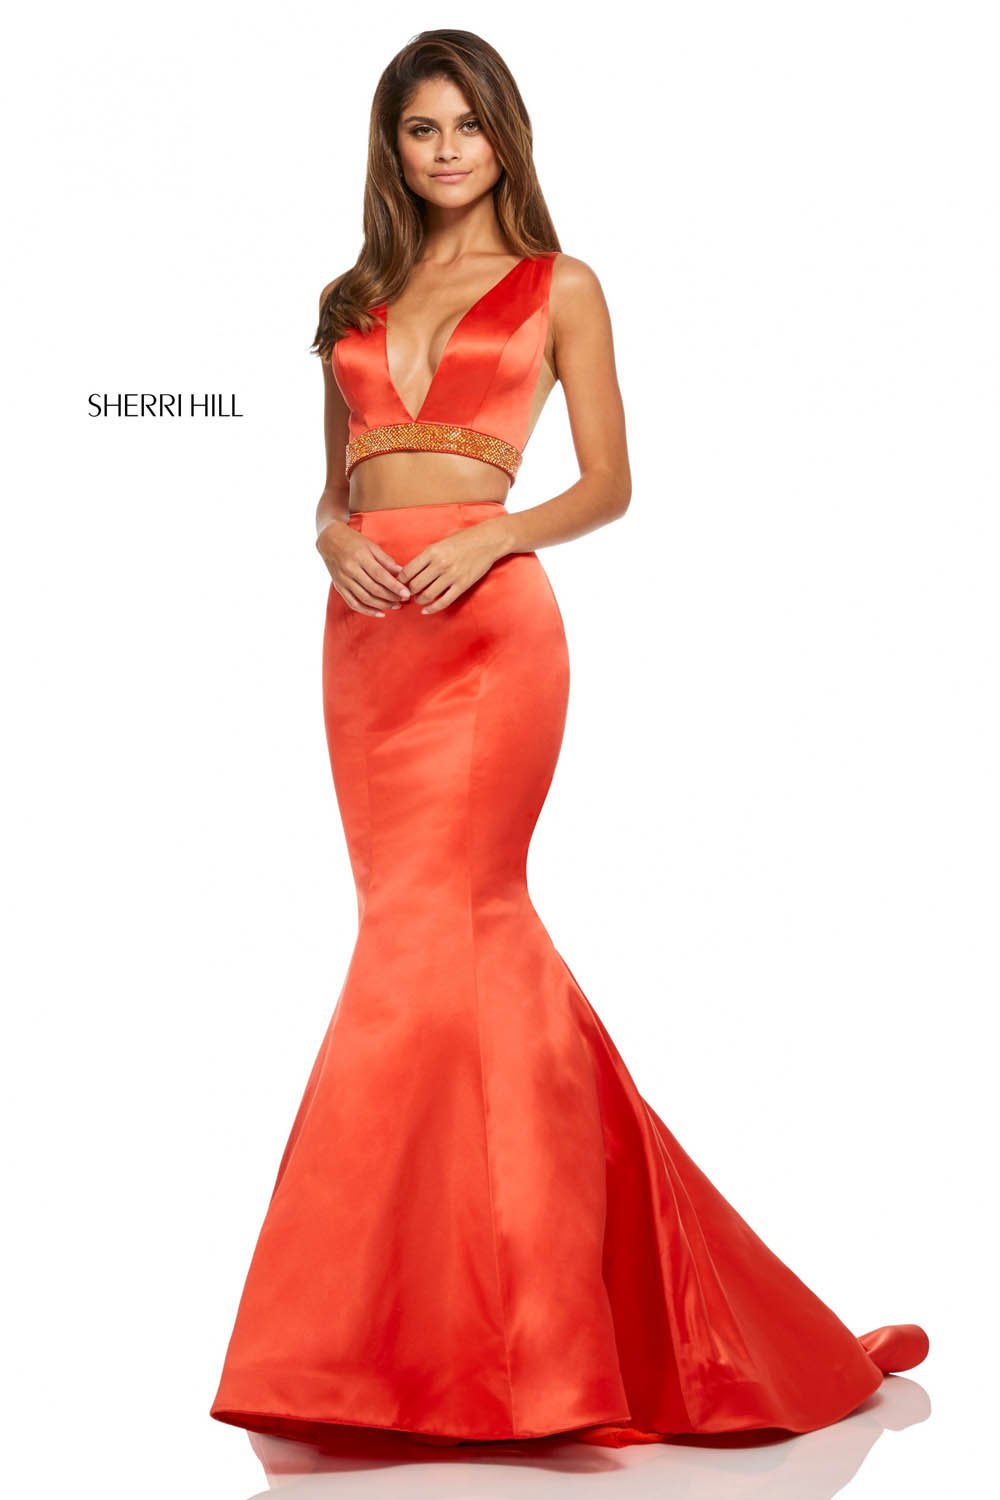 Sherri Hill 52762 dress images in these colors: Red, Emerald, Yellow, Blush, Orange, Royal.